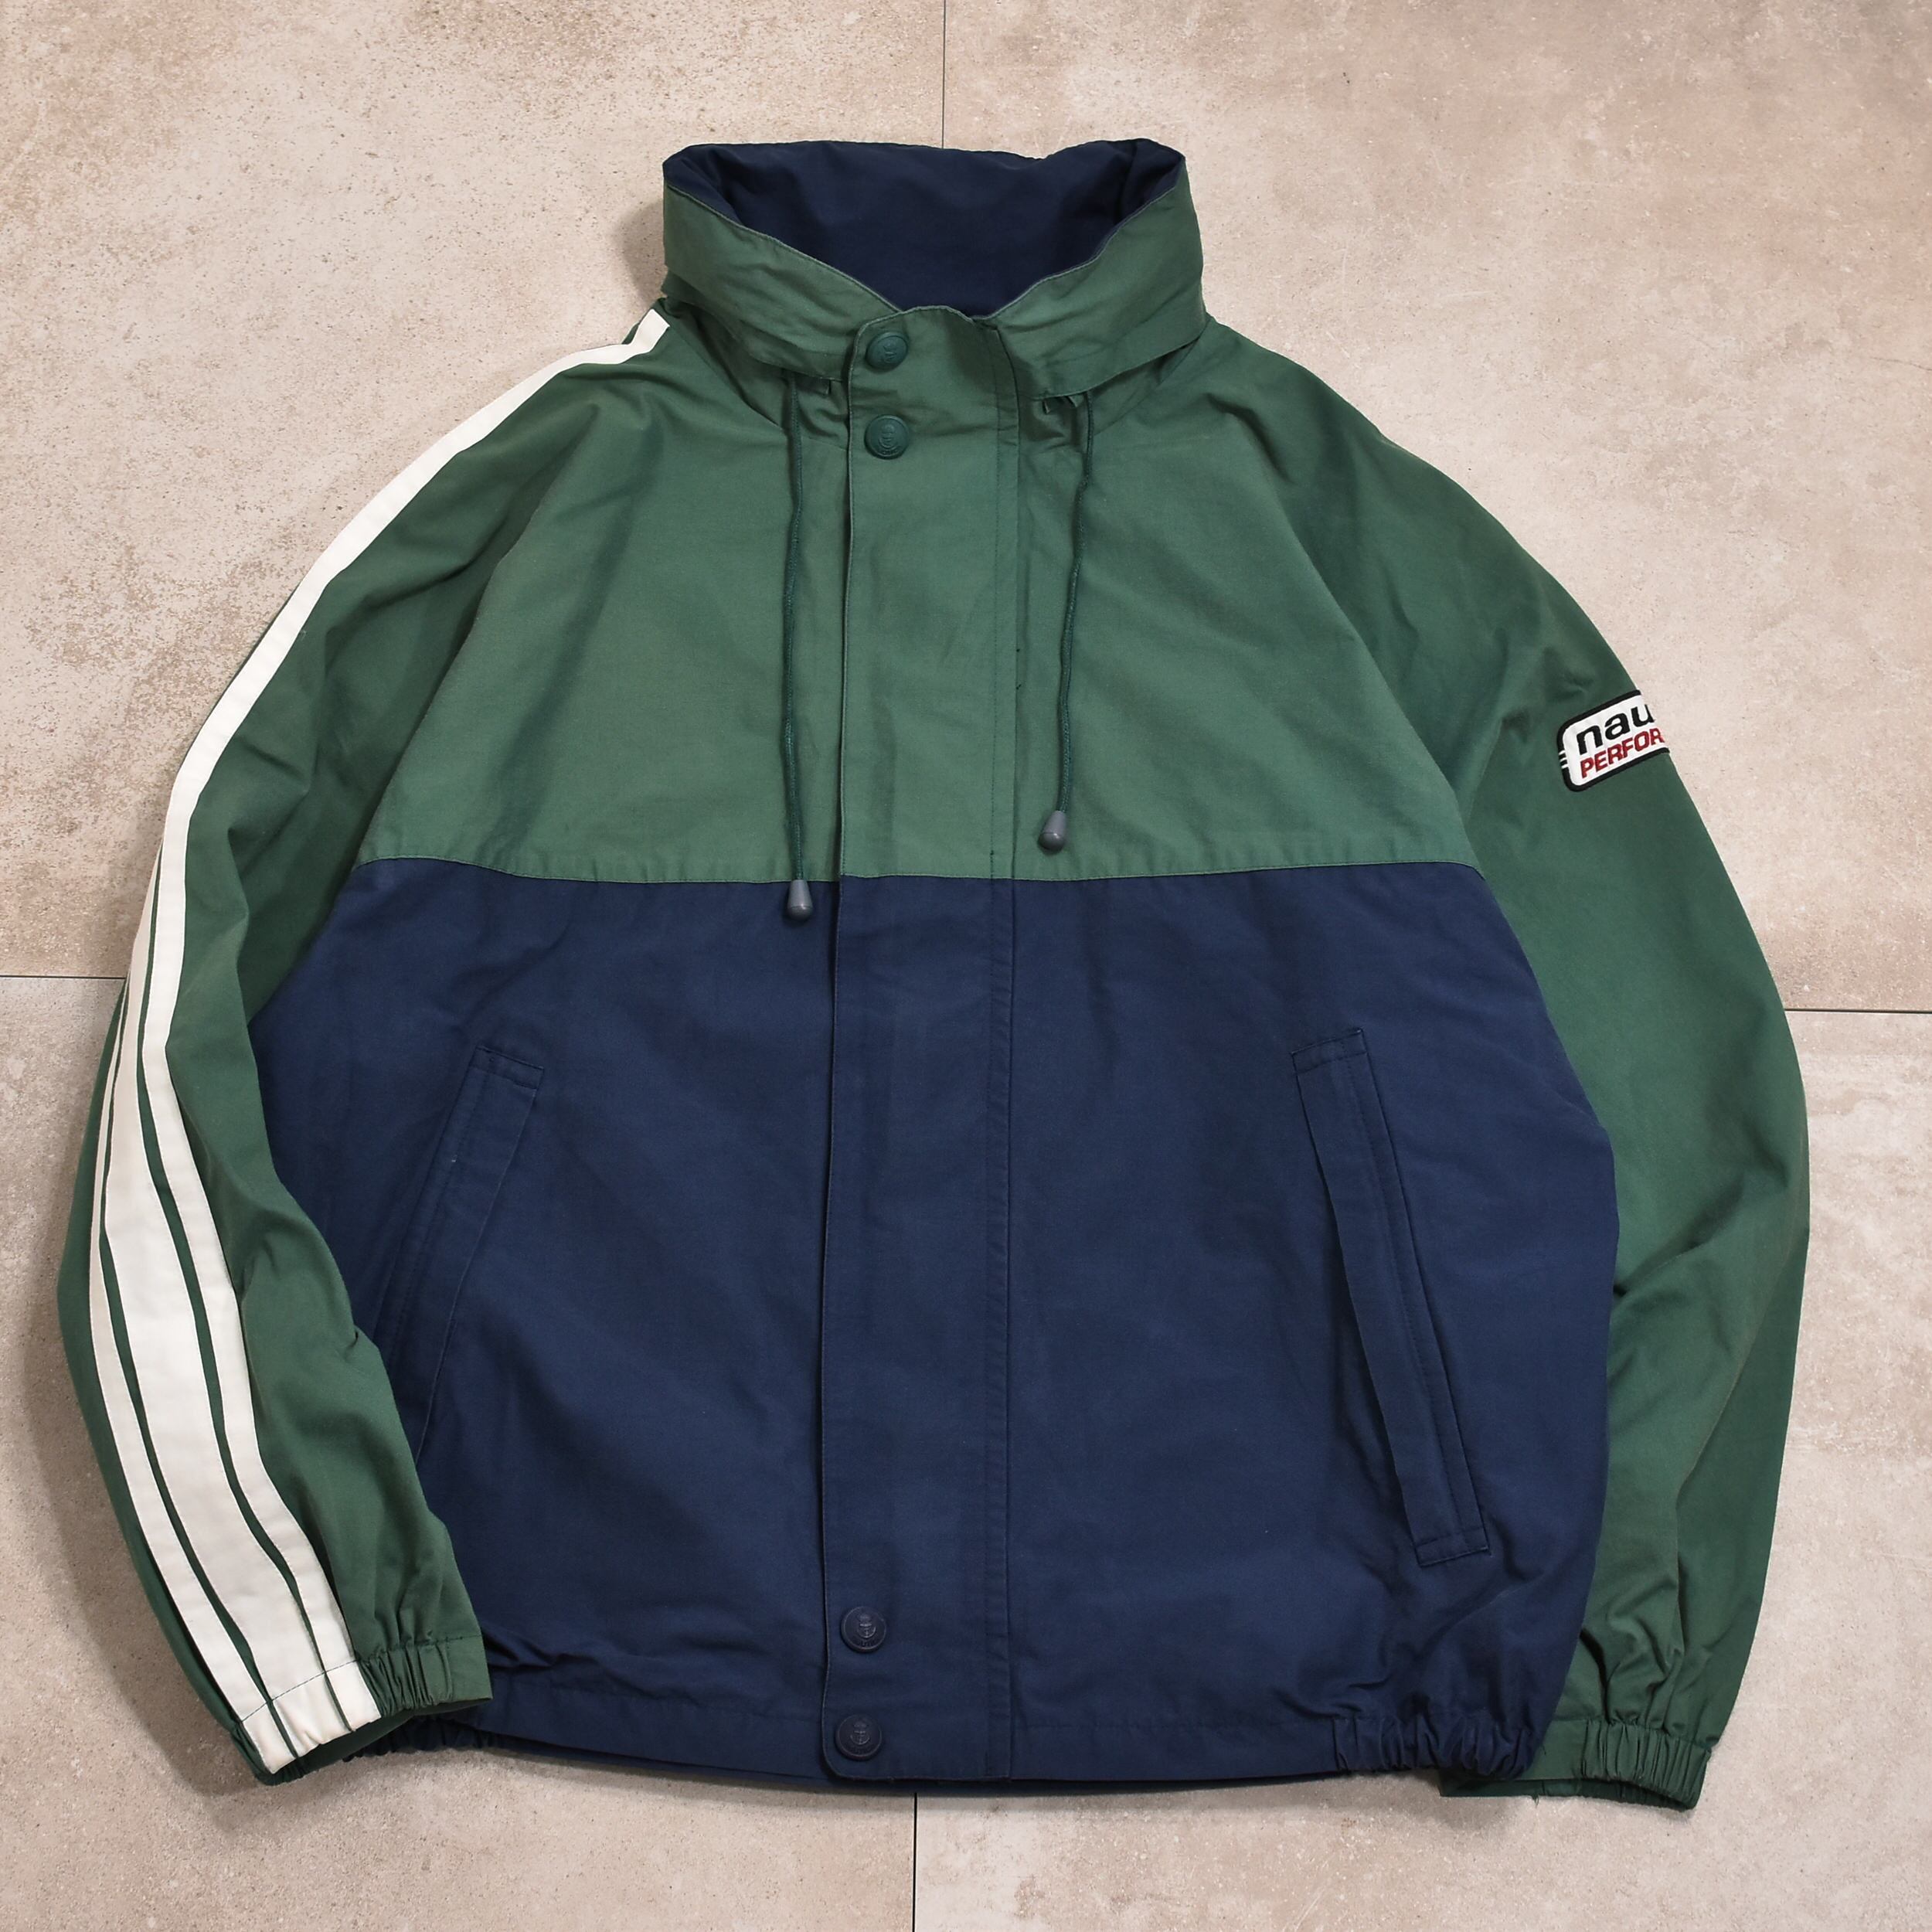 nautica jacket 90s,Exclusive Deals and Offers,OFF 67%